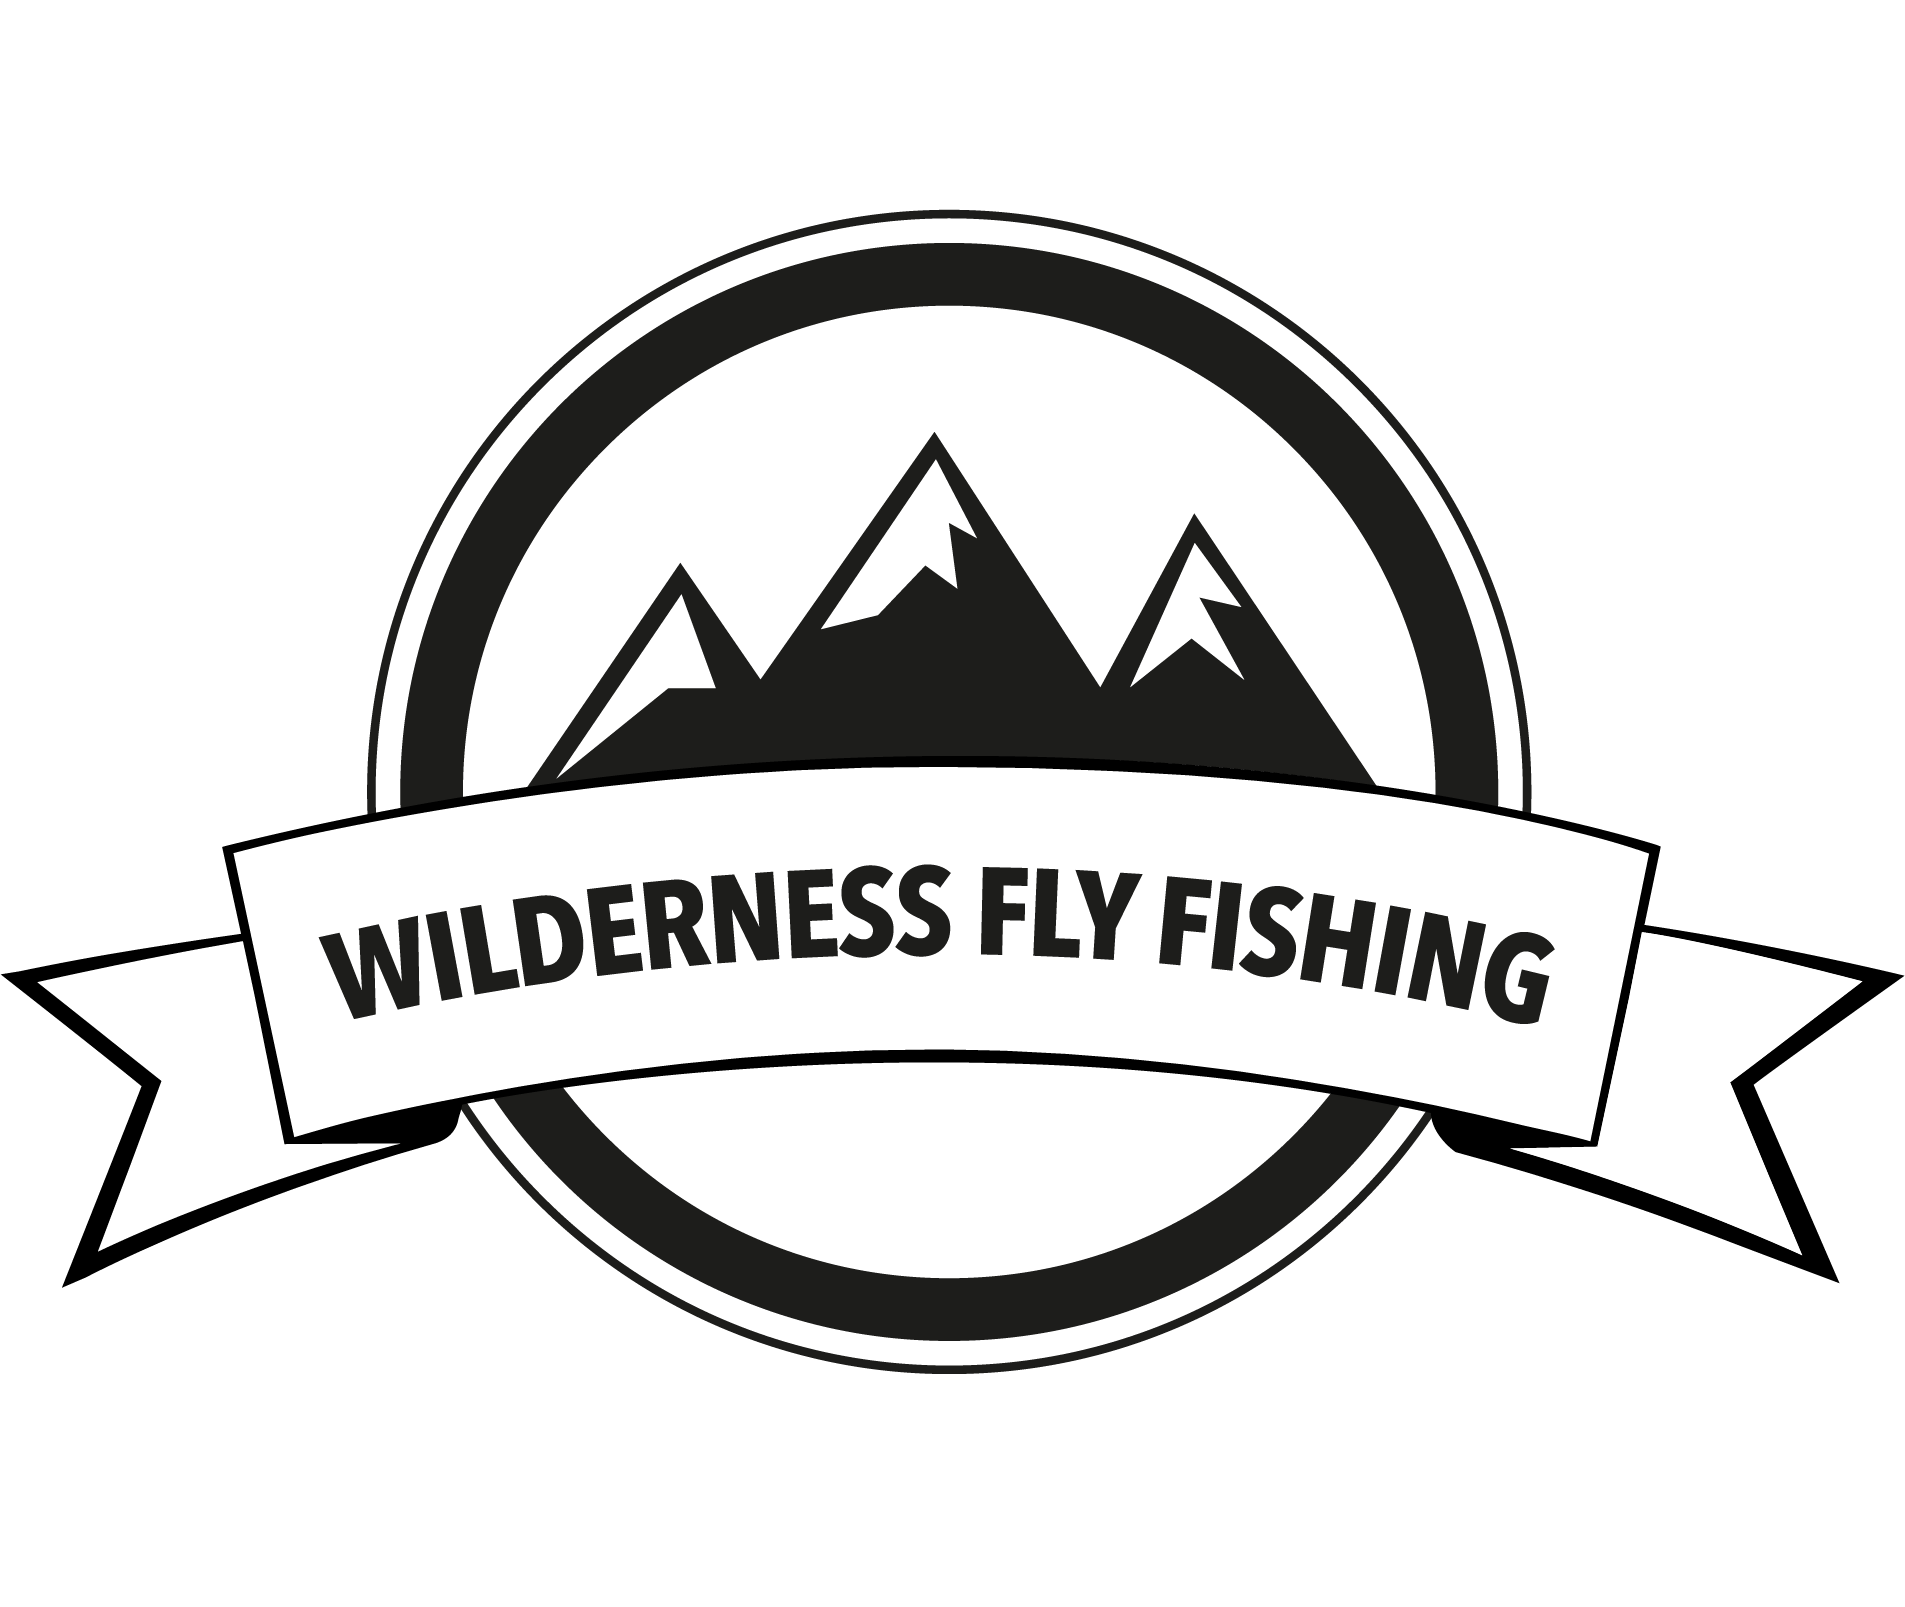 Private Fly Fishing Lessons - just 2 hours from Melbourne's C.B.D.